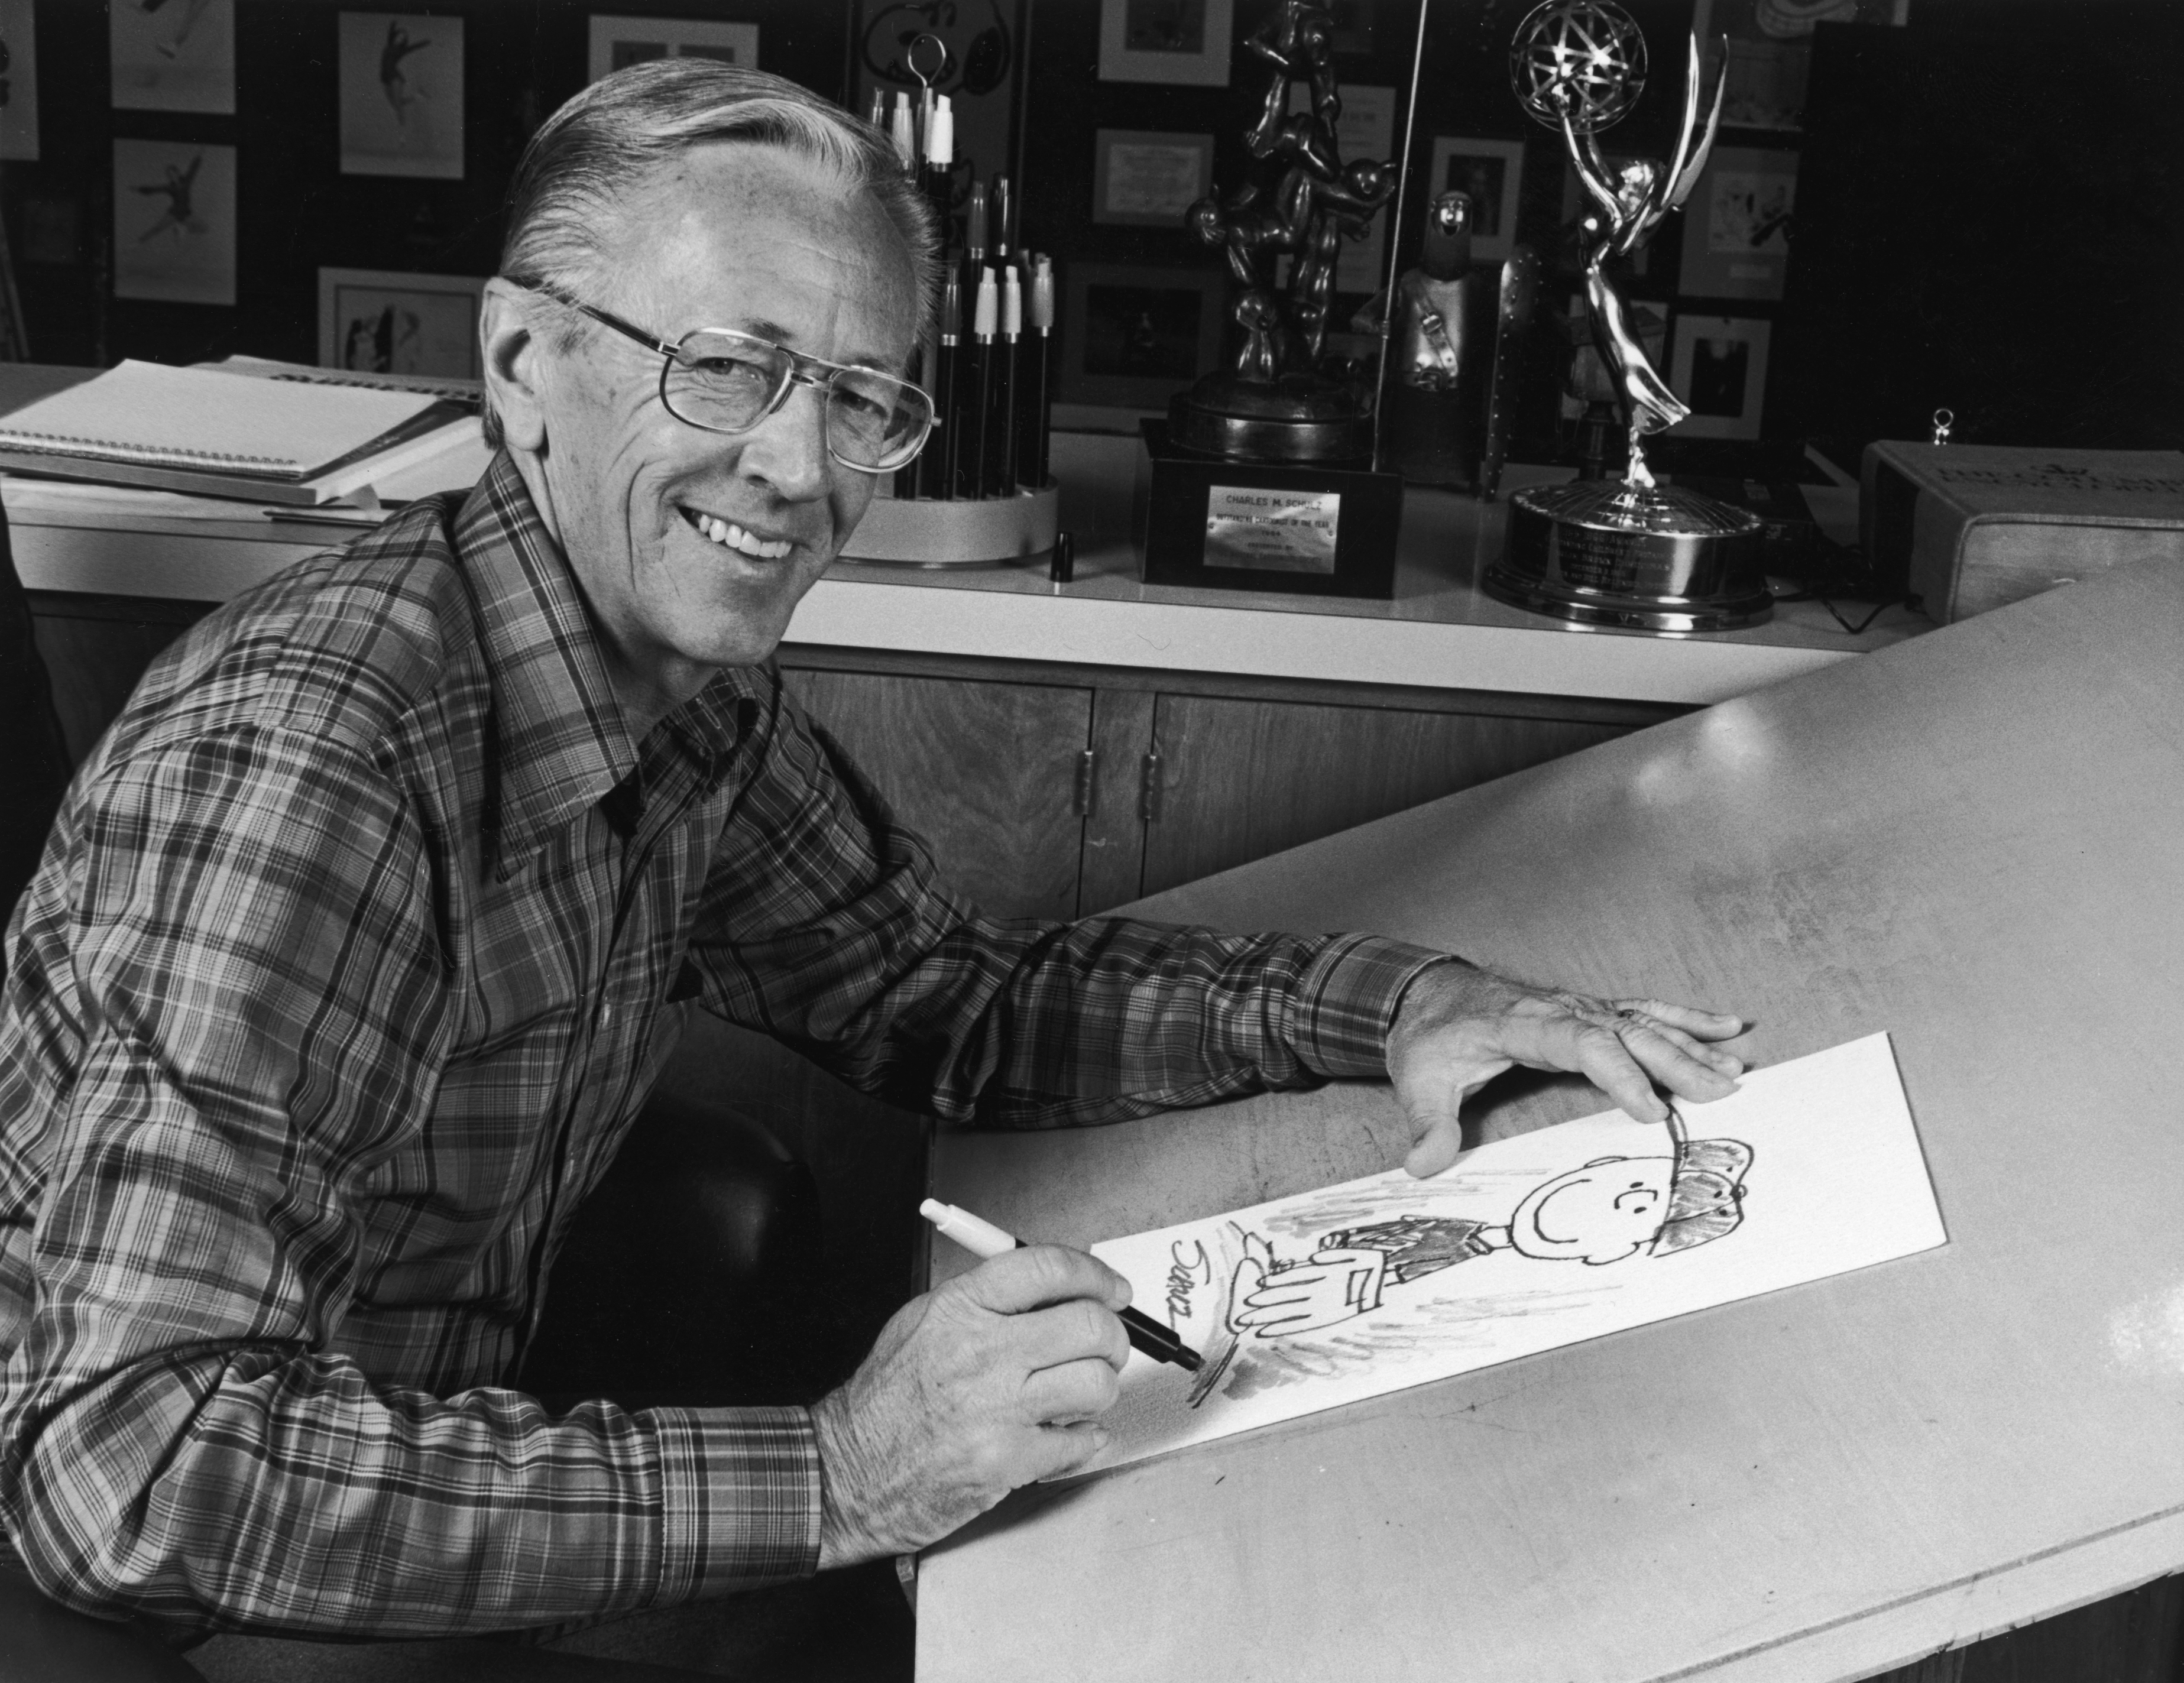 Portrait of American cartoonist Charles M Schulz (1922 - 2001), creator of the 'Peanuts' comic strip, sitting at his studio drawing table with a picture of his character Charlie Brown and some awards behind him. (CBS Photo Archive—Getty Images)